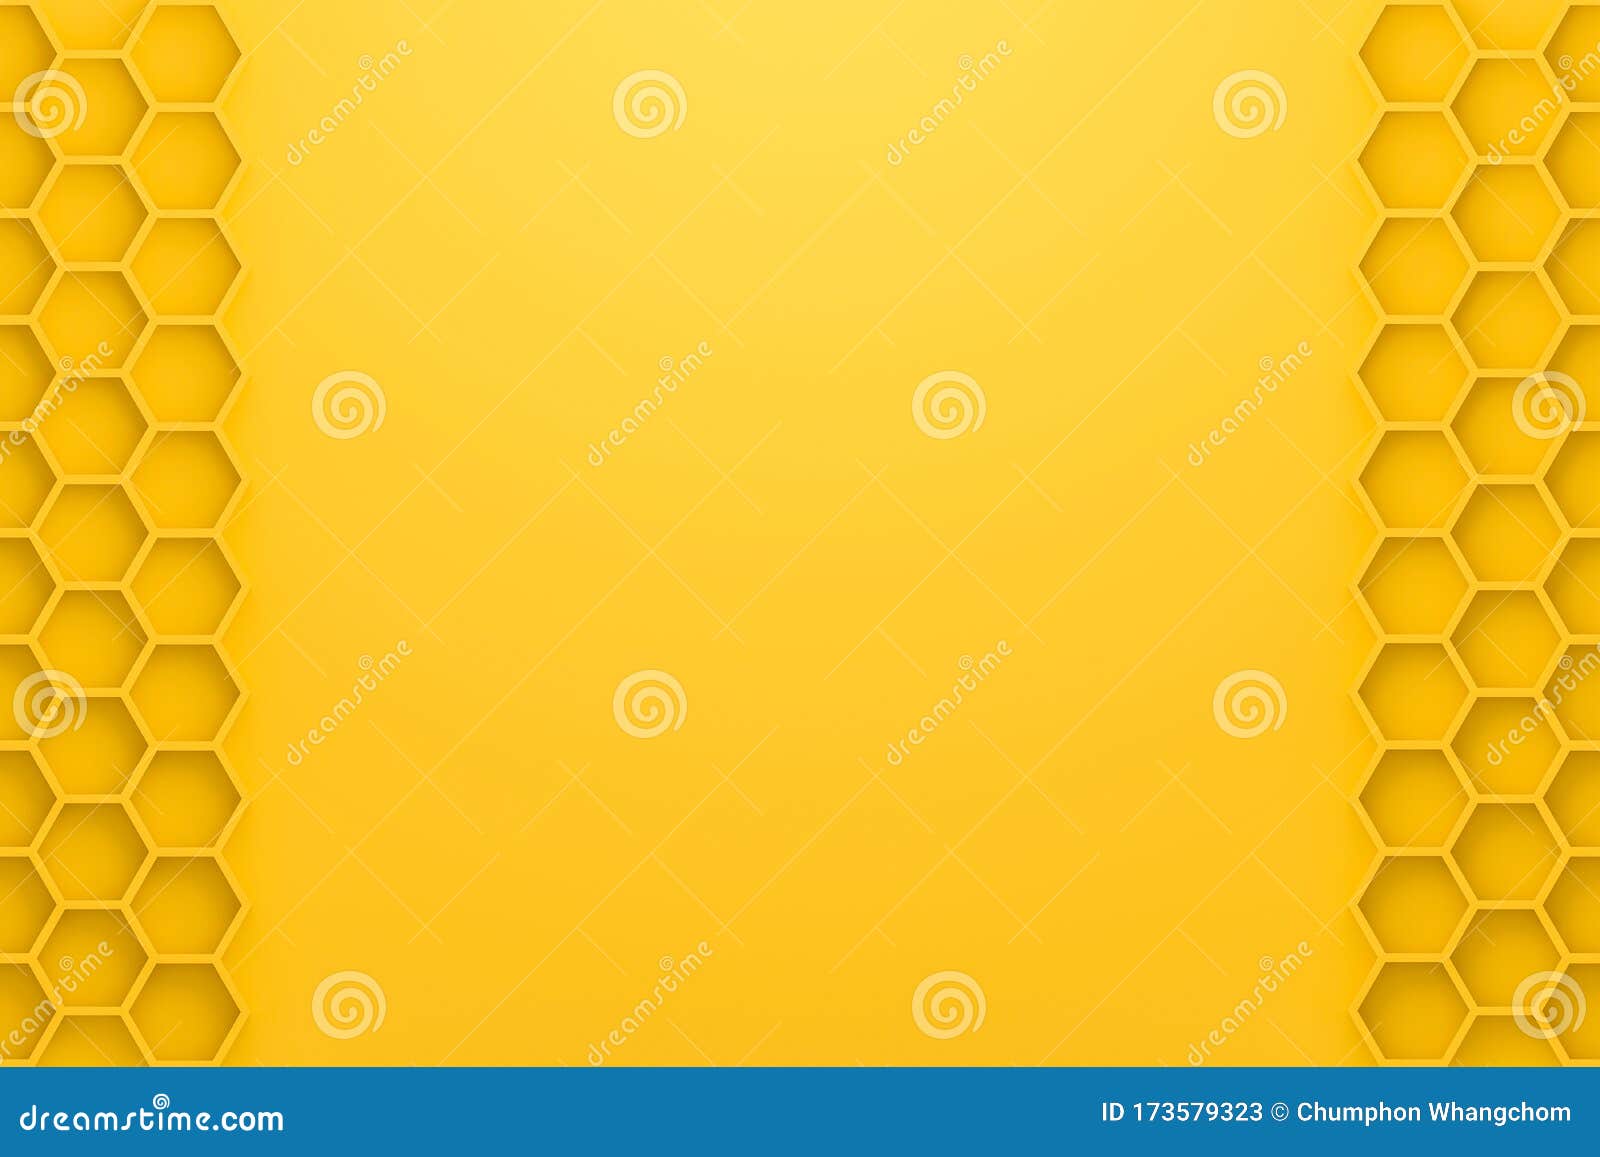 Abstract Yellow Background with Honeycomb Style. Blank Rhombus Wallpaper  for Website Template Stock Illustration - Illustration of blank, hexagonal:  173579323